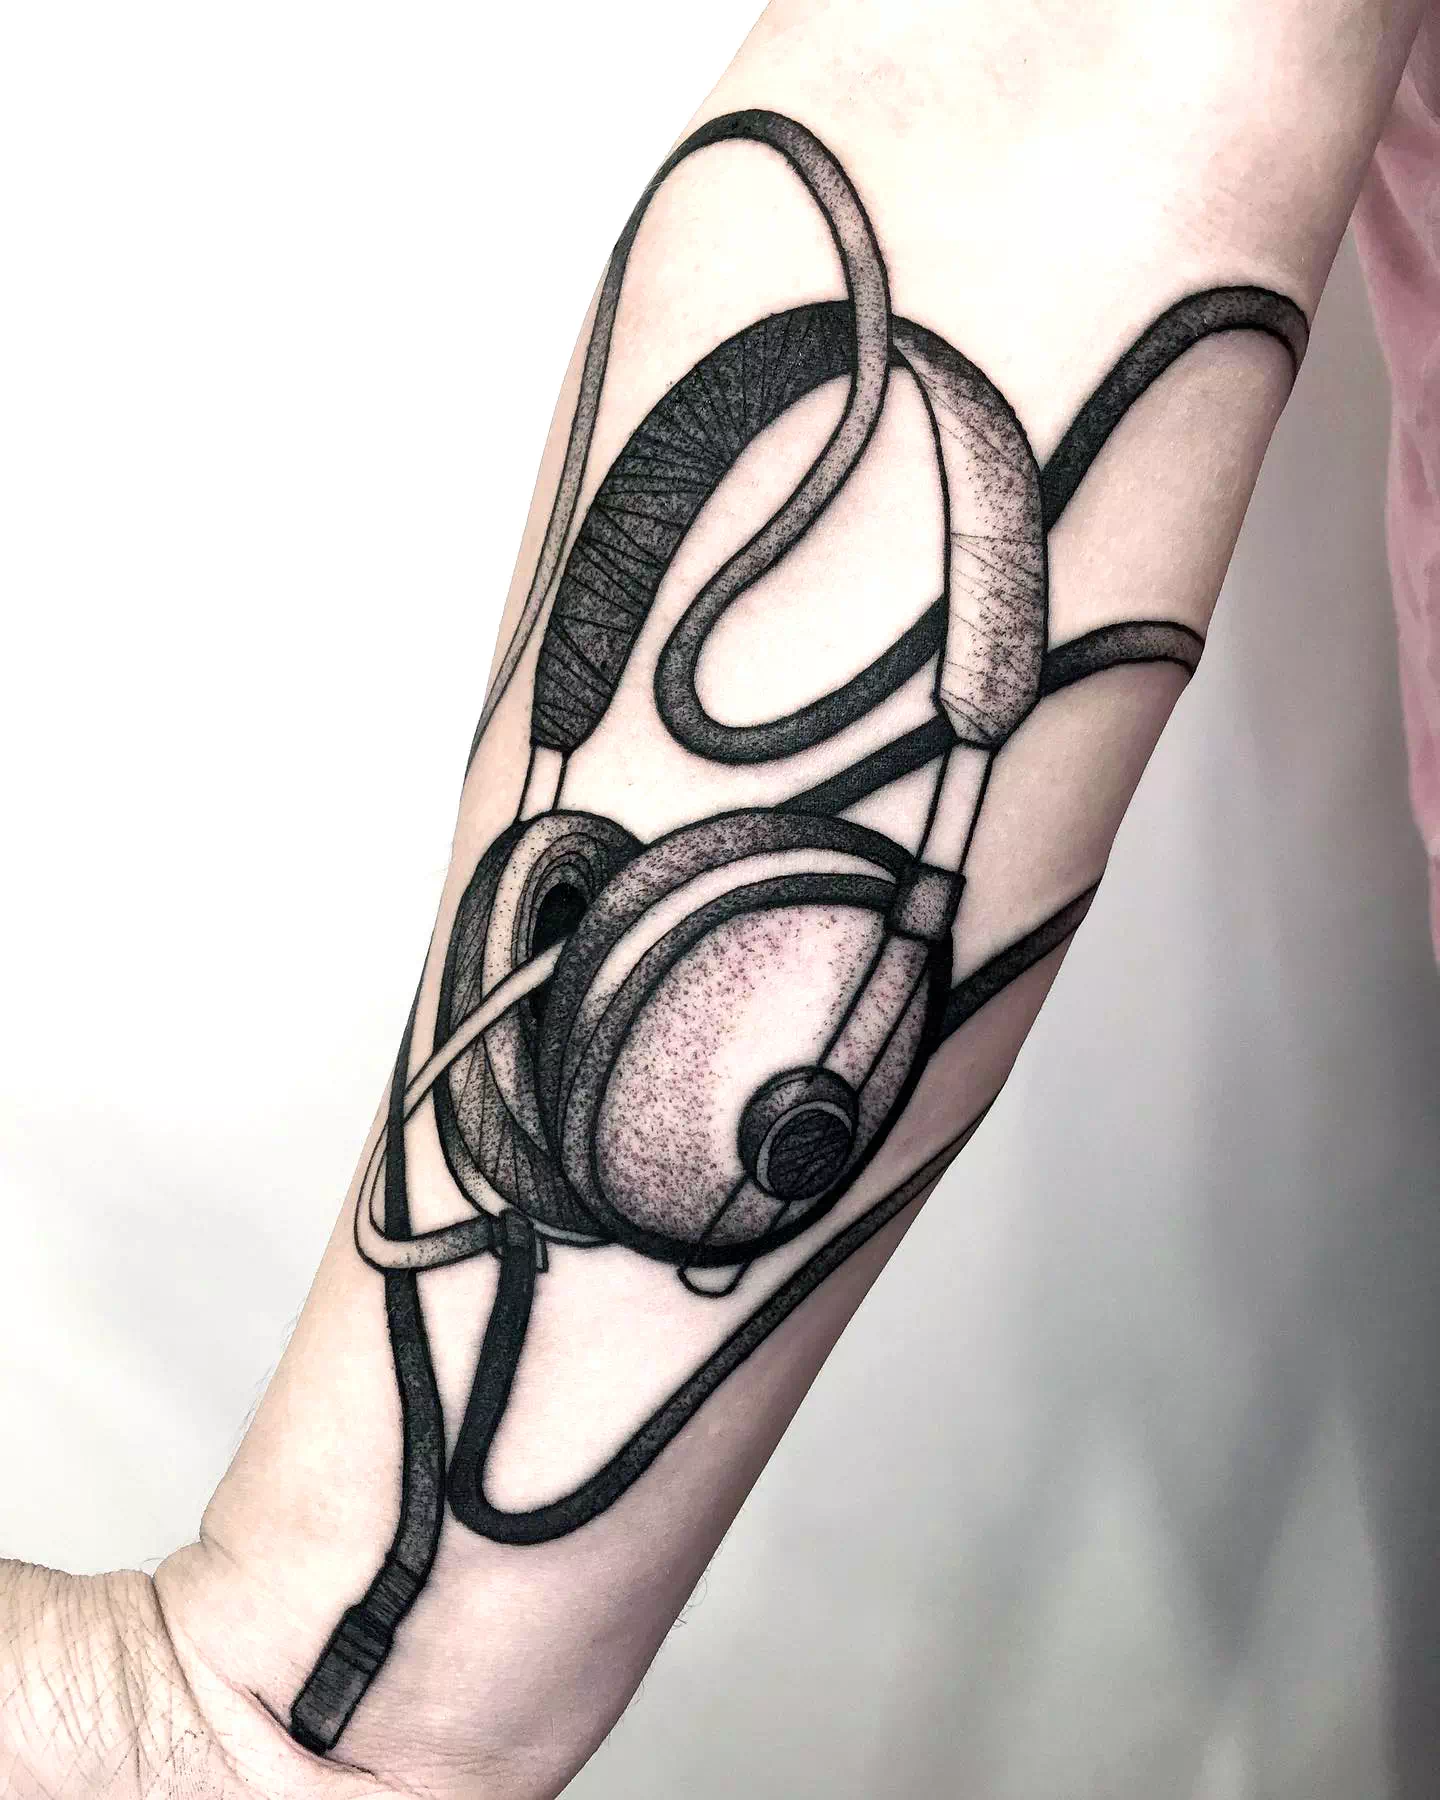 Headphones tattoo meanings & popular questions